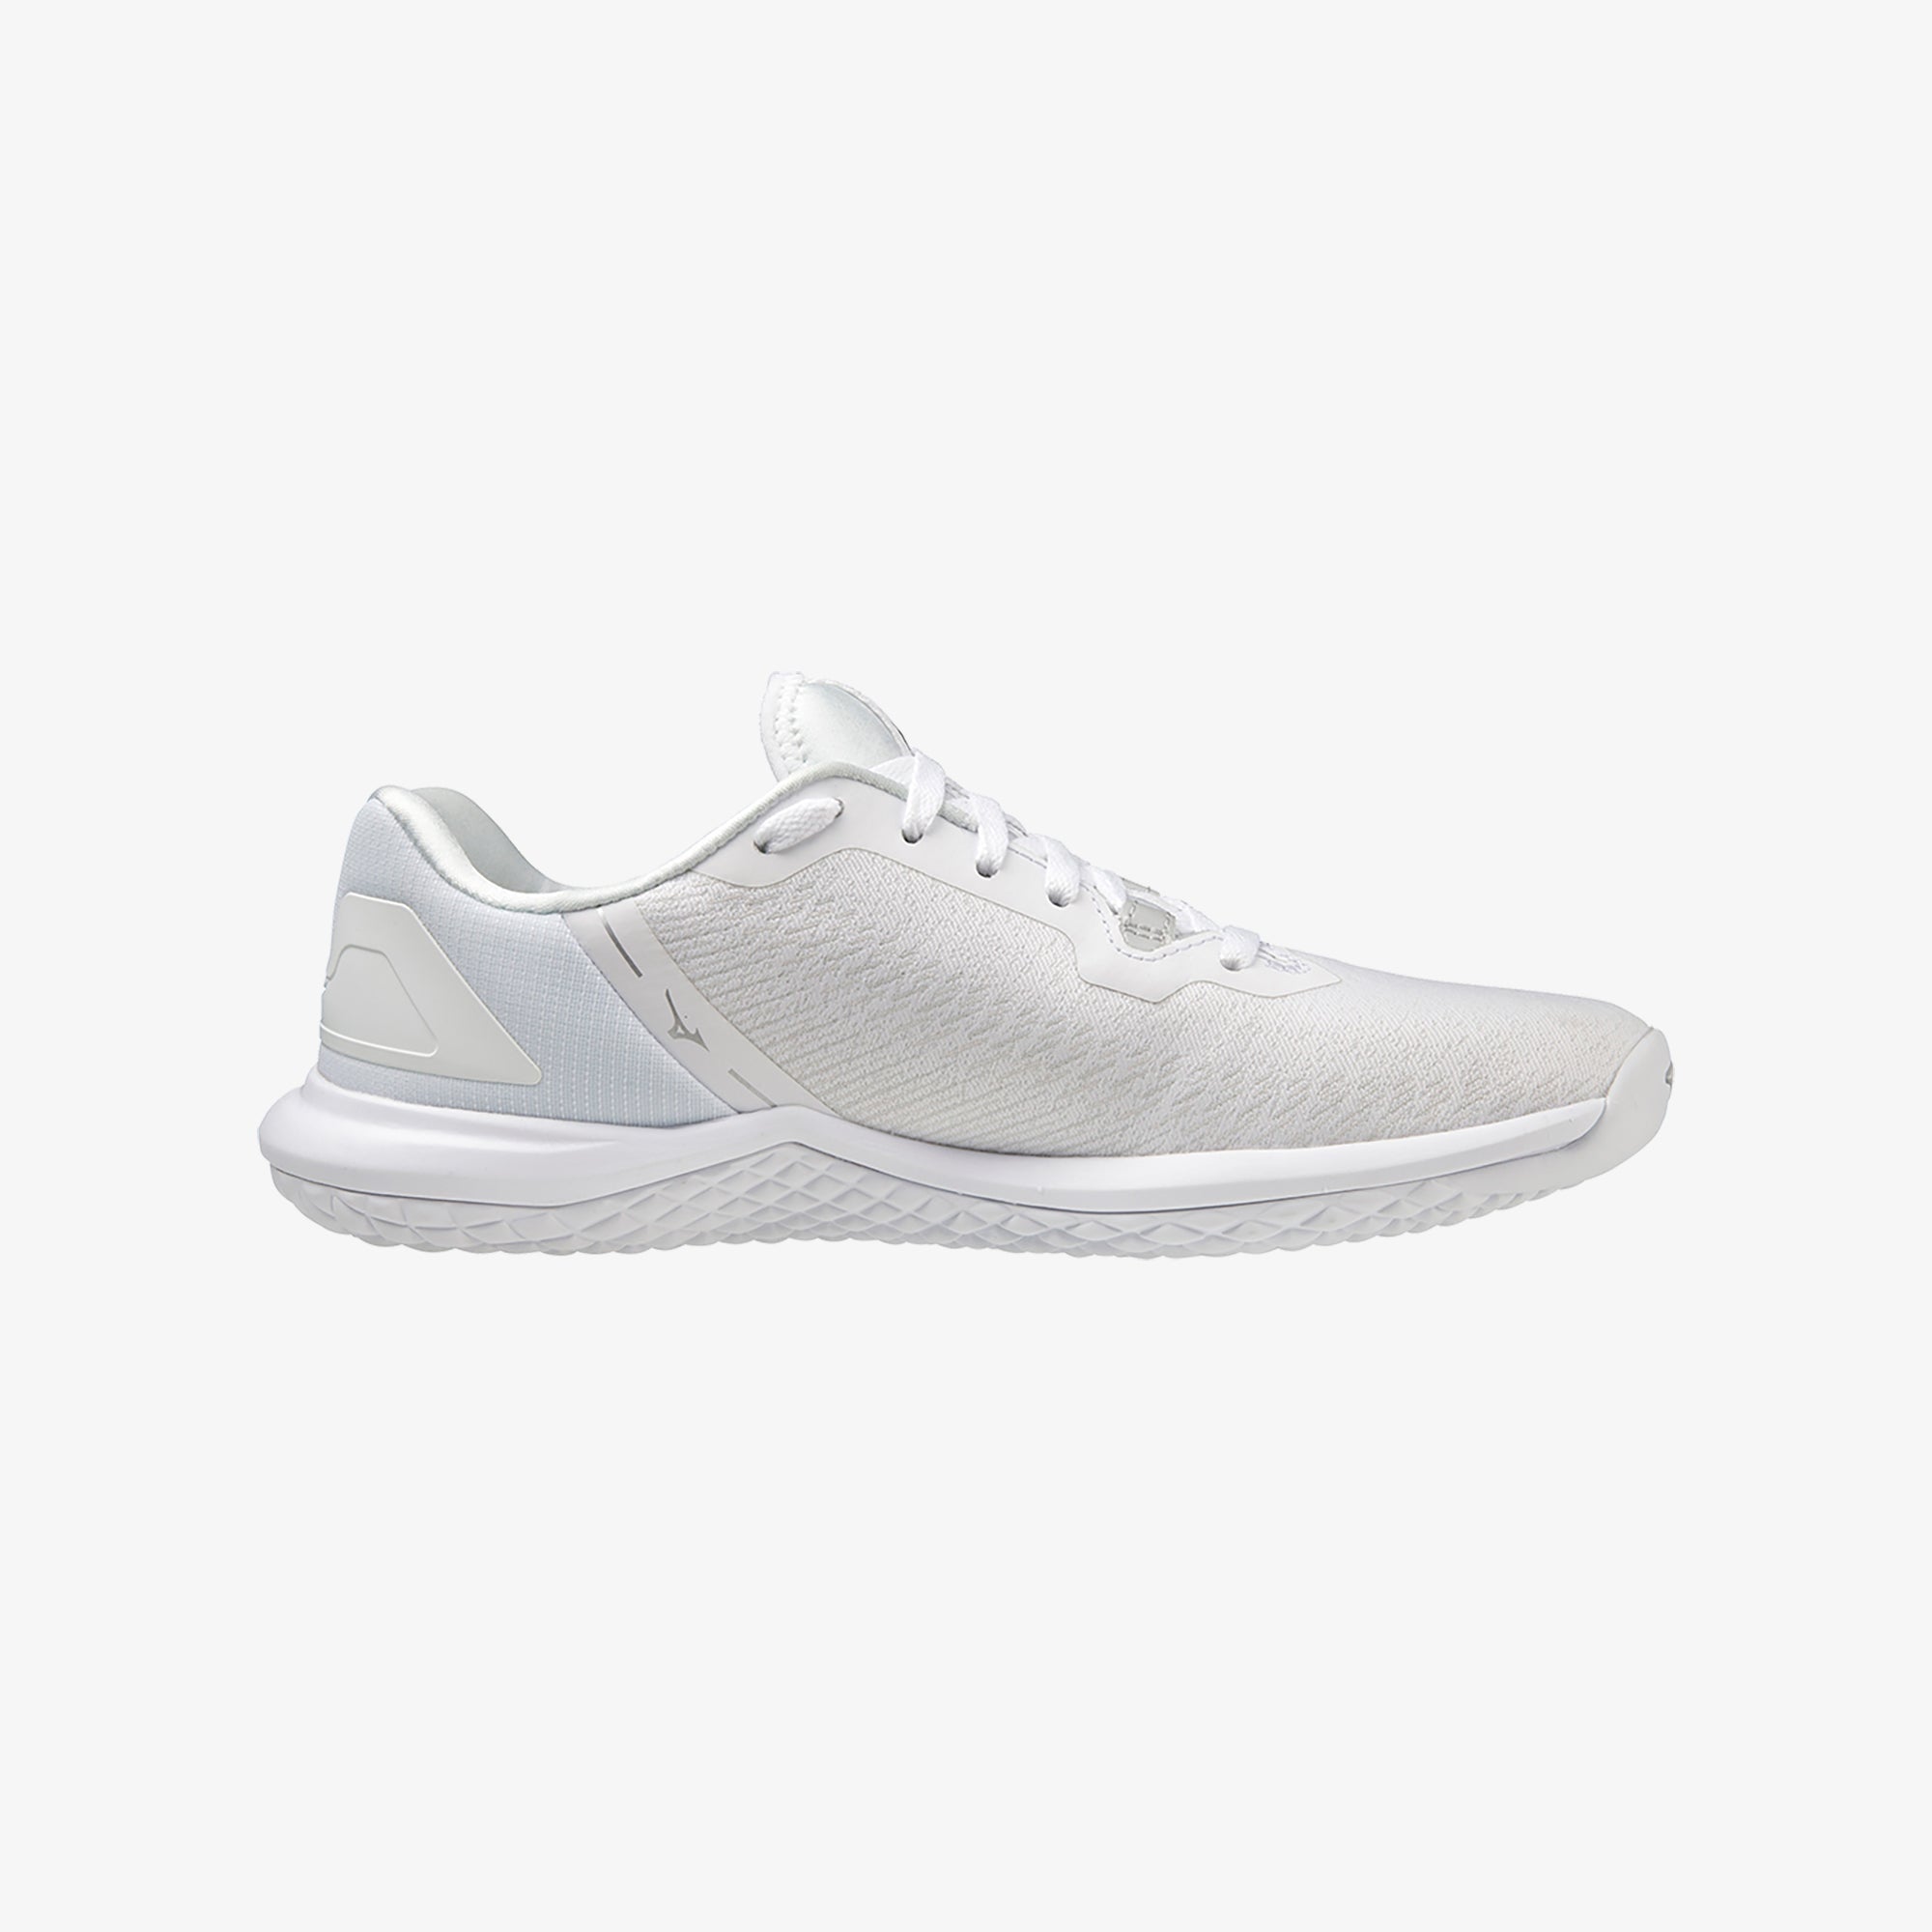 TF SHO TIGHT WHITE : : Clothing, Shoes & Accessories